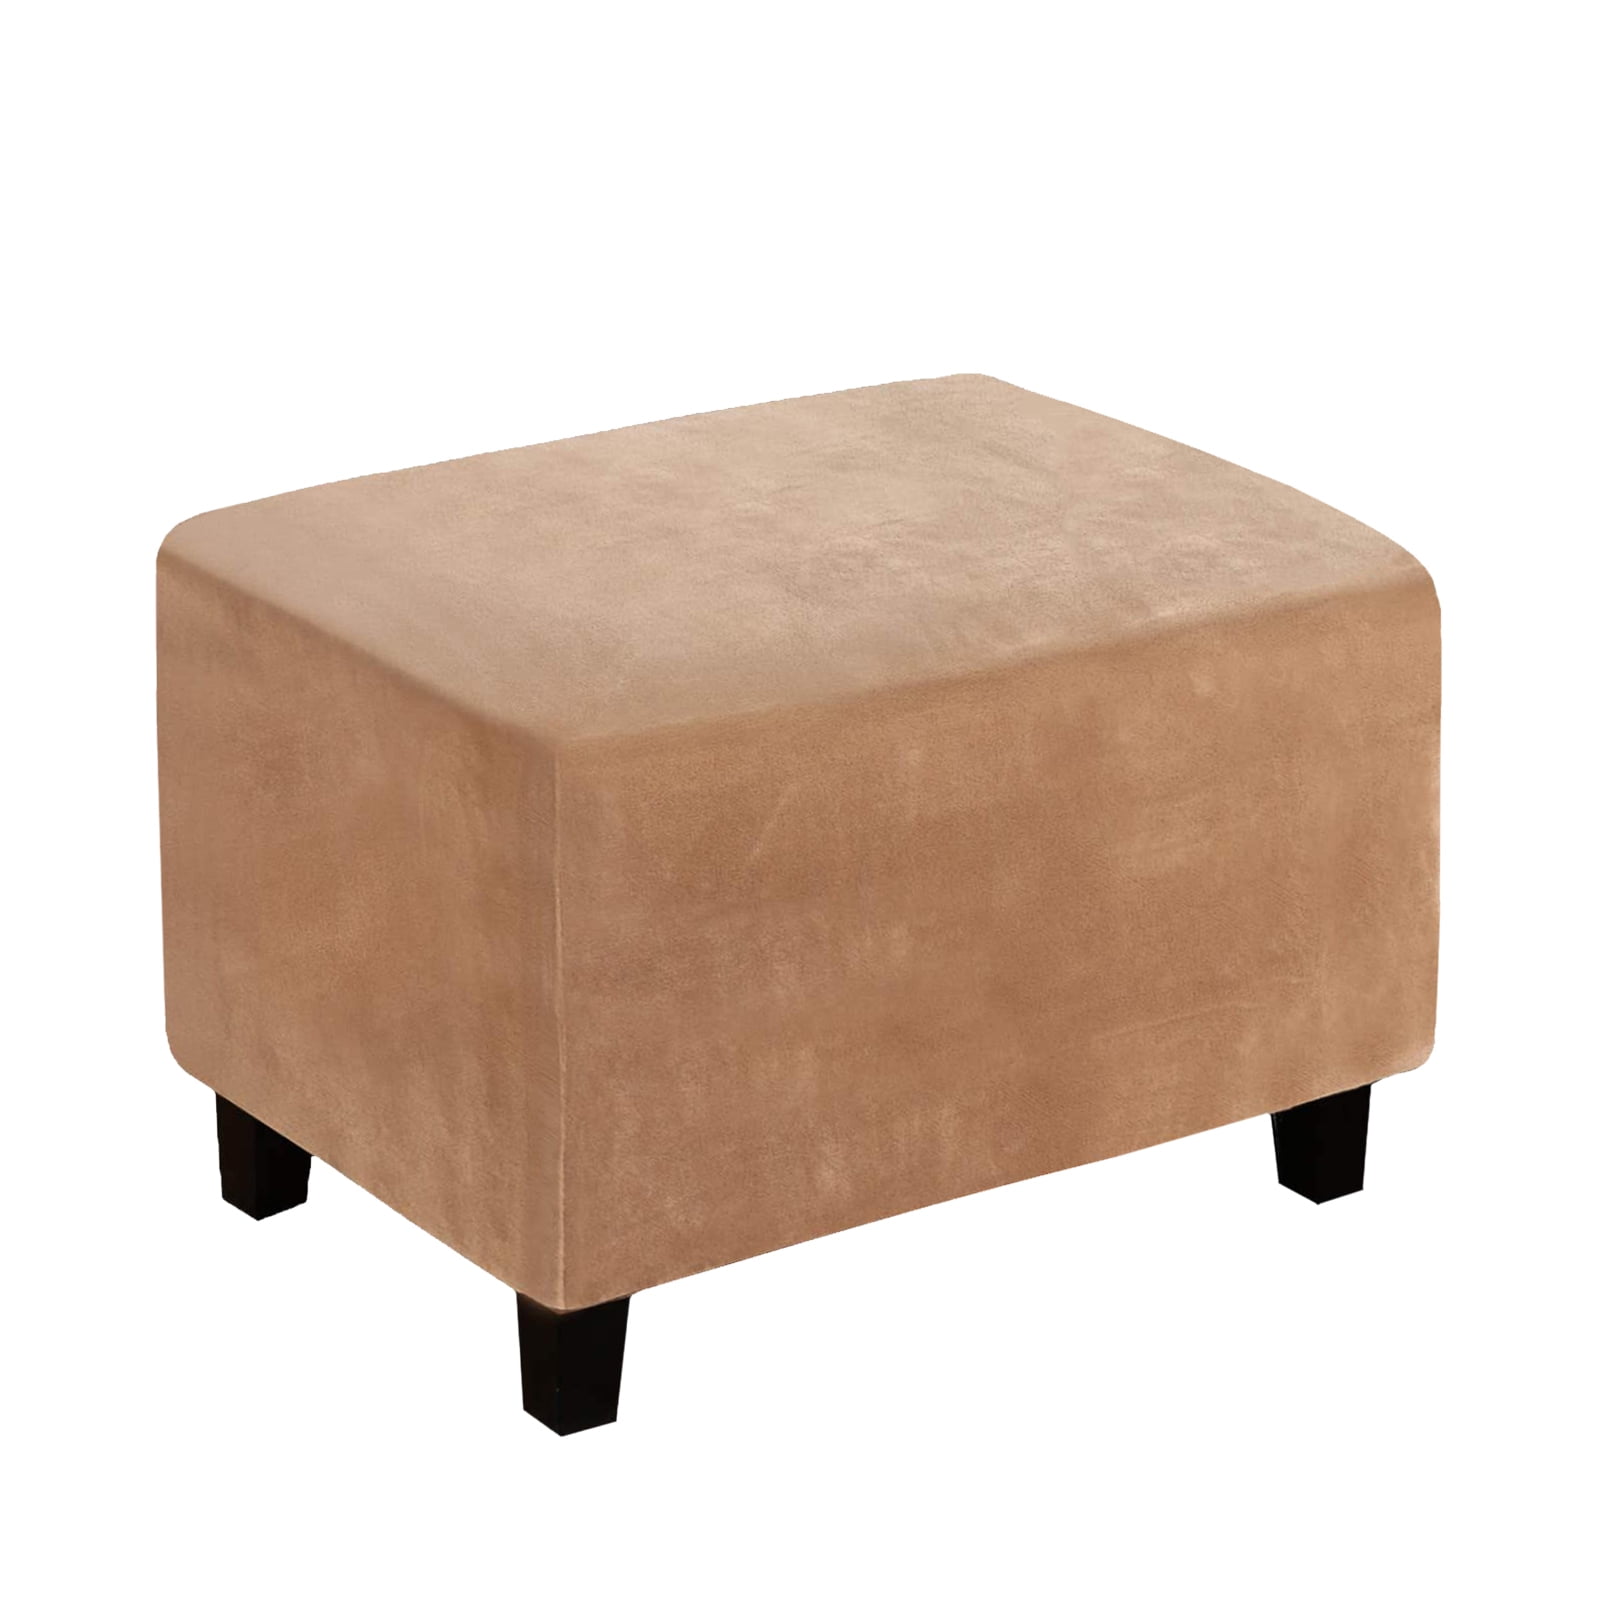 Ottoman Pouf Cover Footrest Stool Slipcover Furniture Protector  Dustproof M 